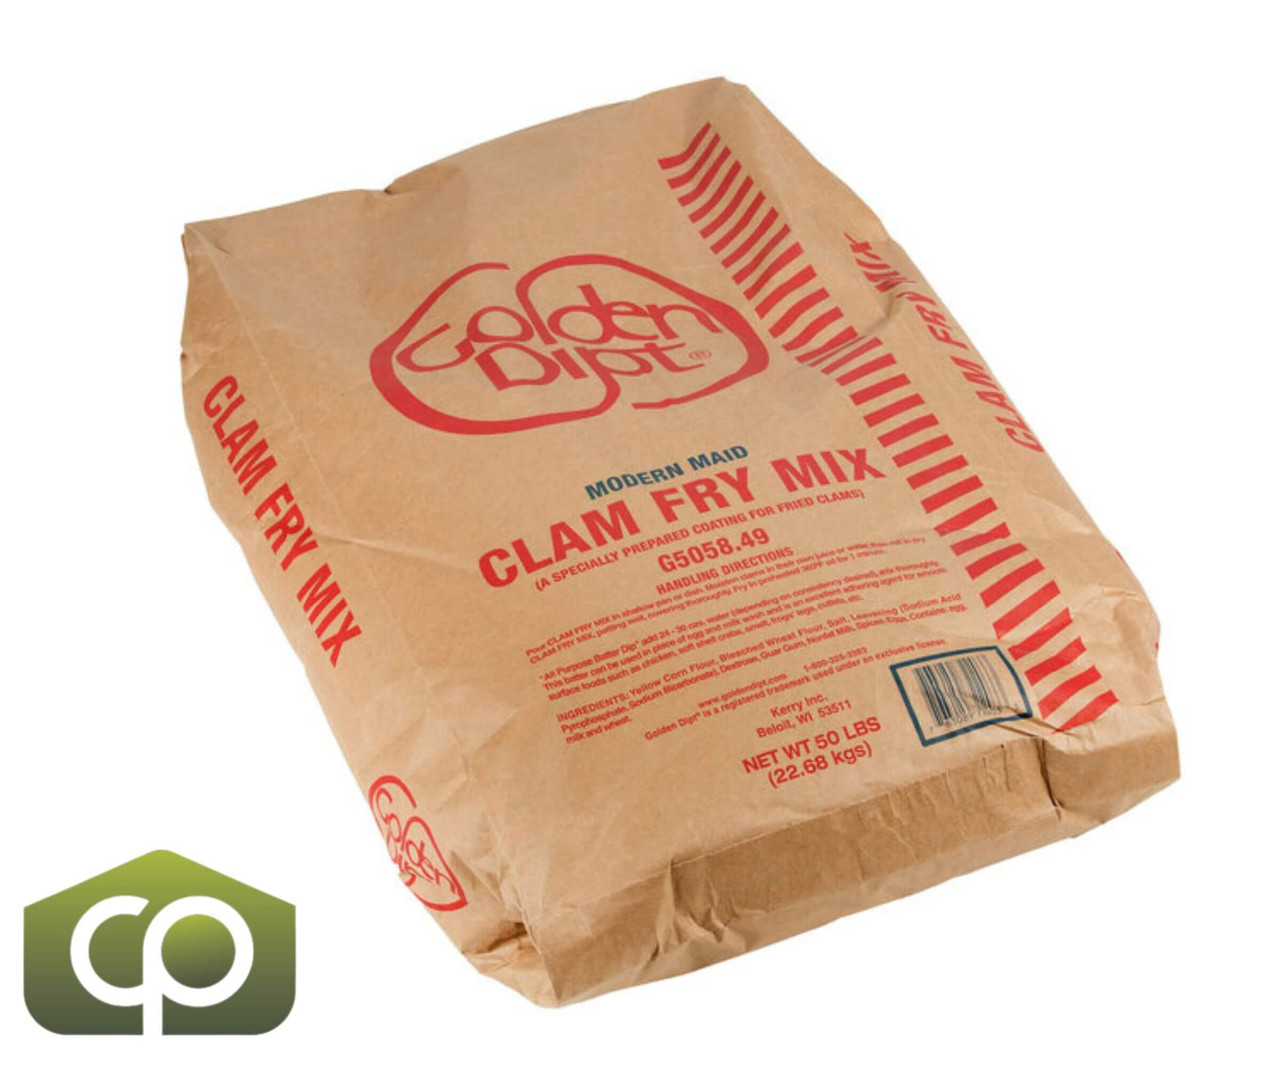 Golden Dipt Modern Maid 50 lbs./22.68 kg New England Style Clam Fry Breader Mix-Chicken Pieces